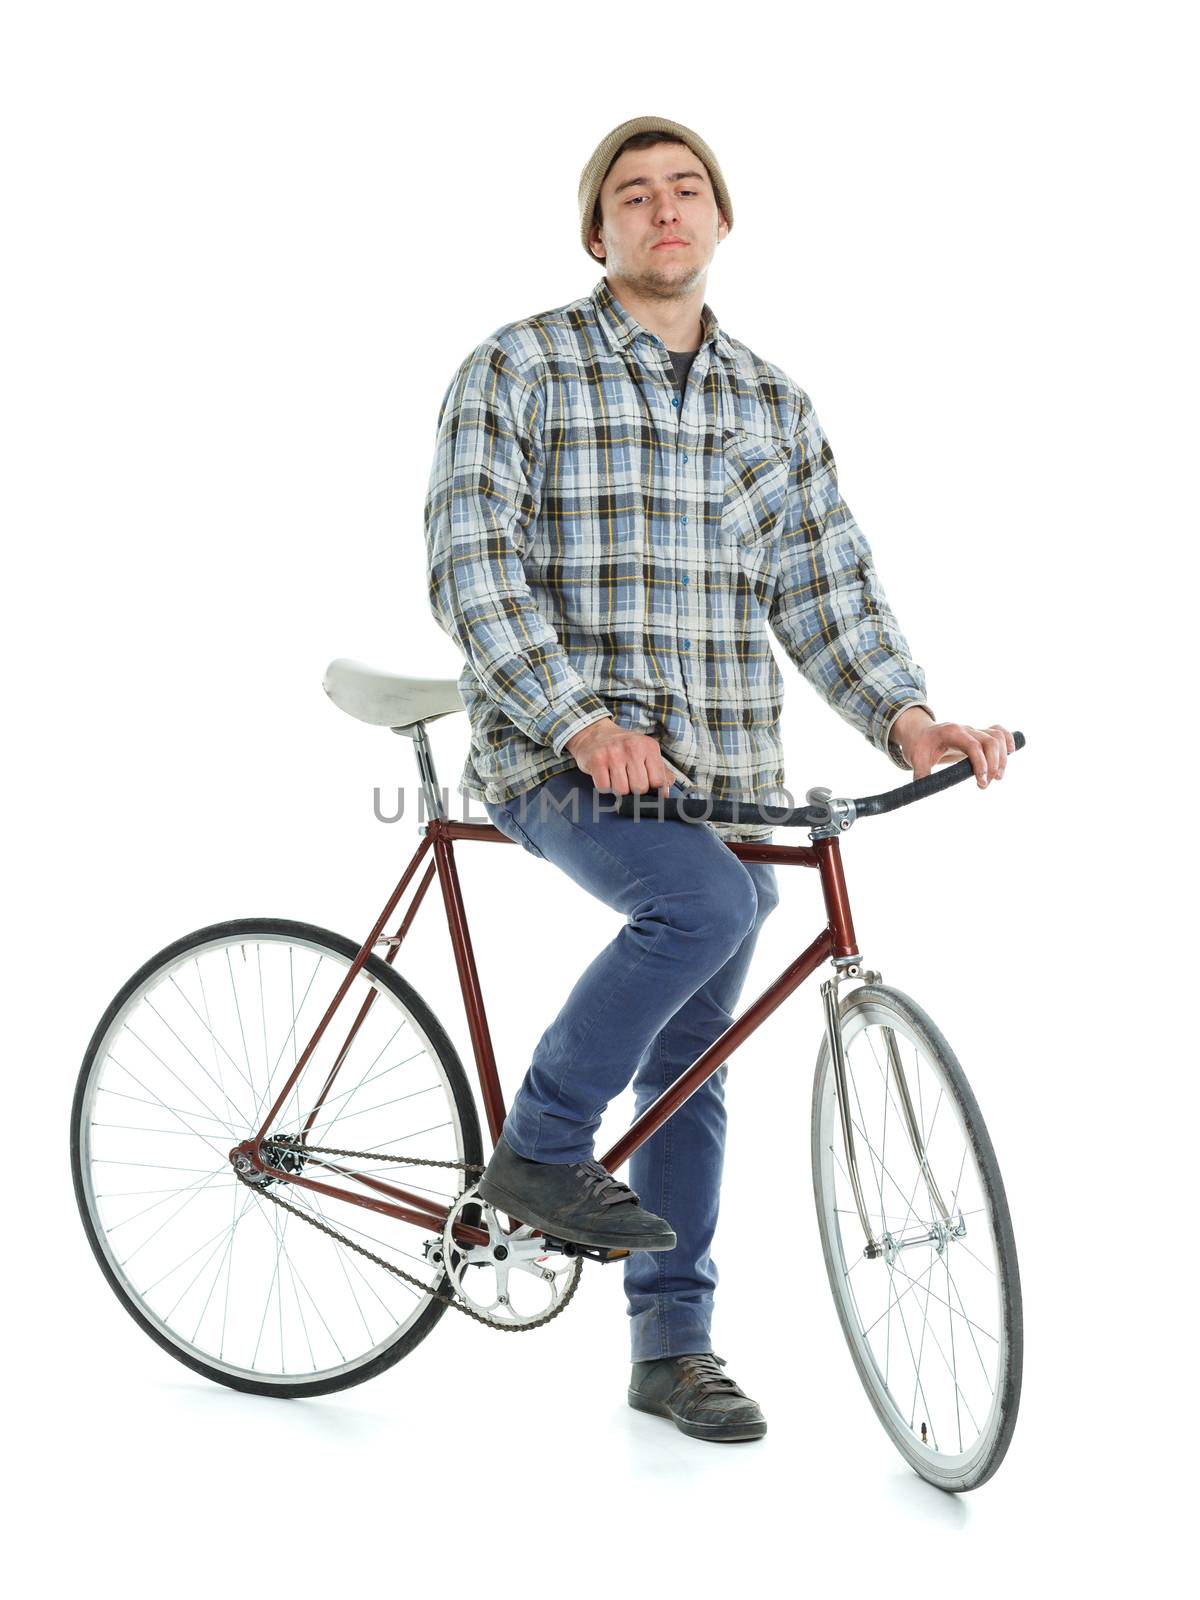 Young man doing tricks on fixed gear bicycle on a white background